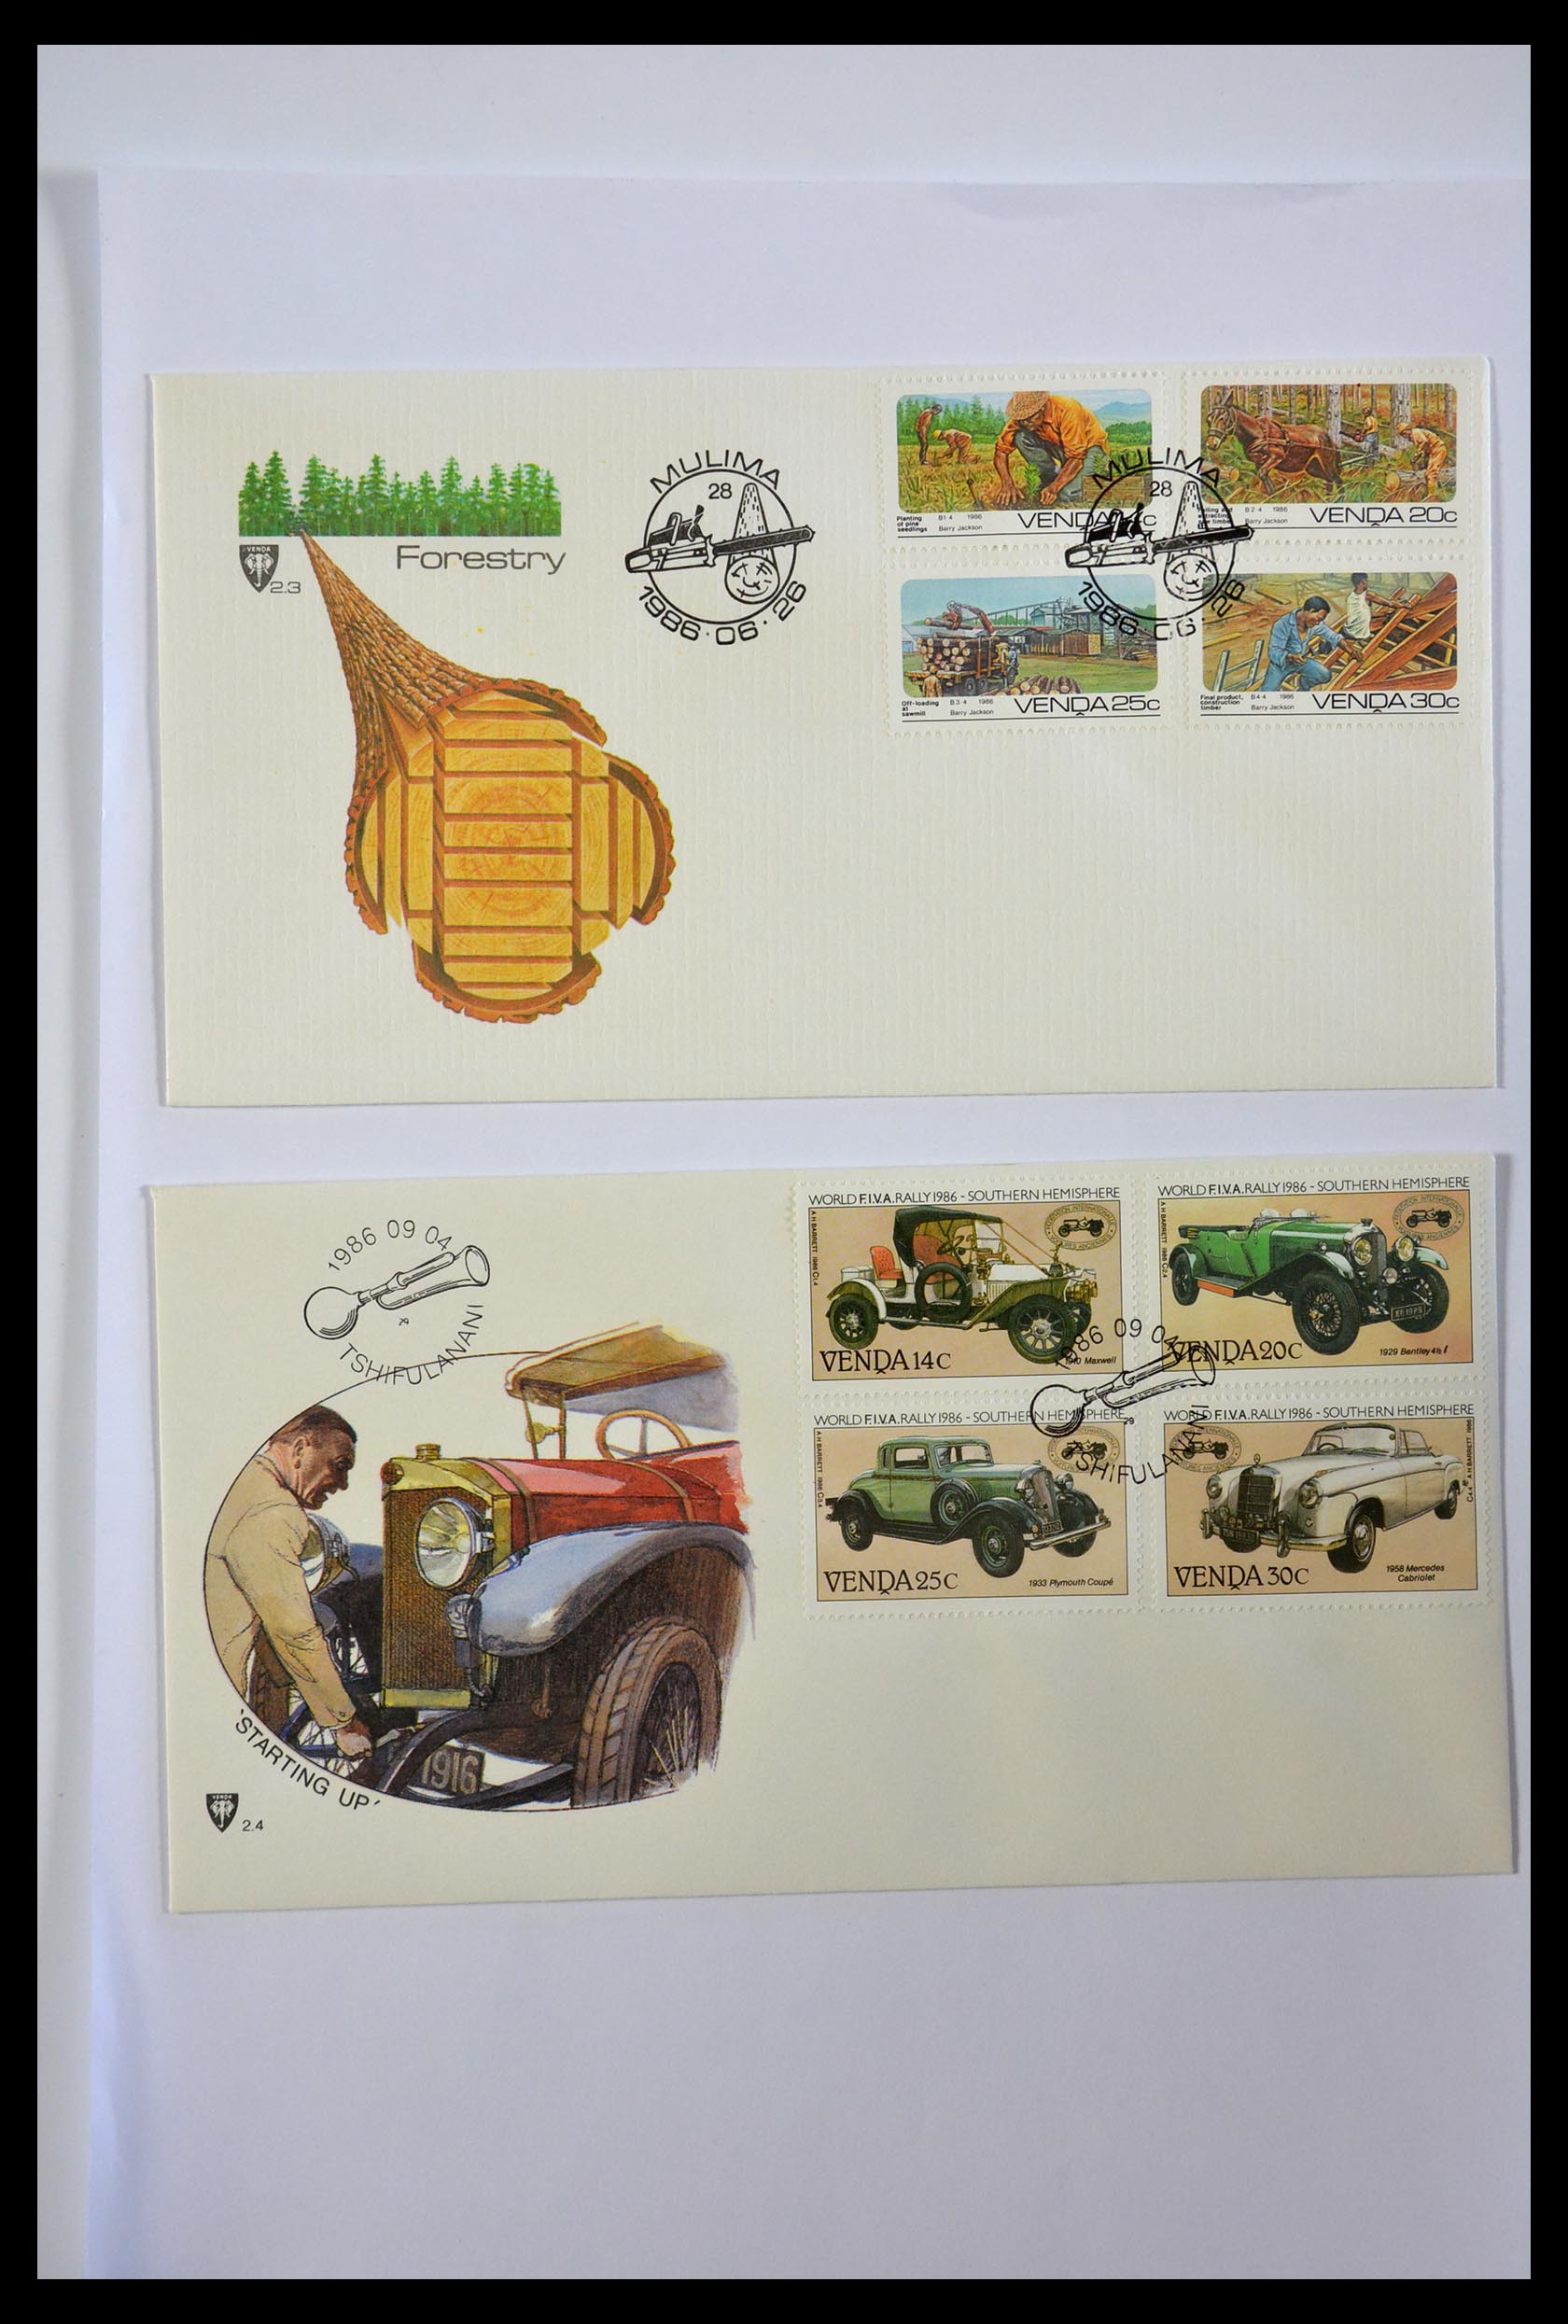 29356 591 - 29356 South Africa homelands first day covers 1979-1991.